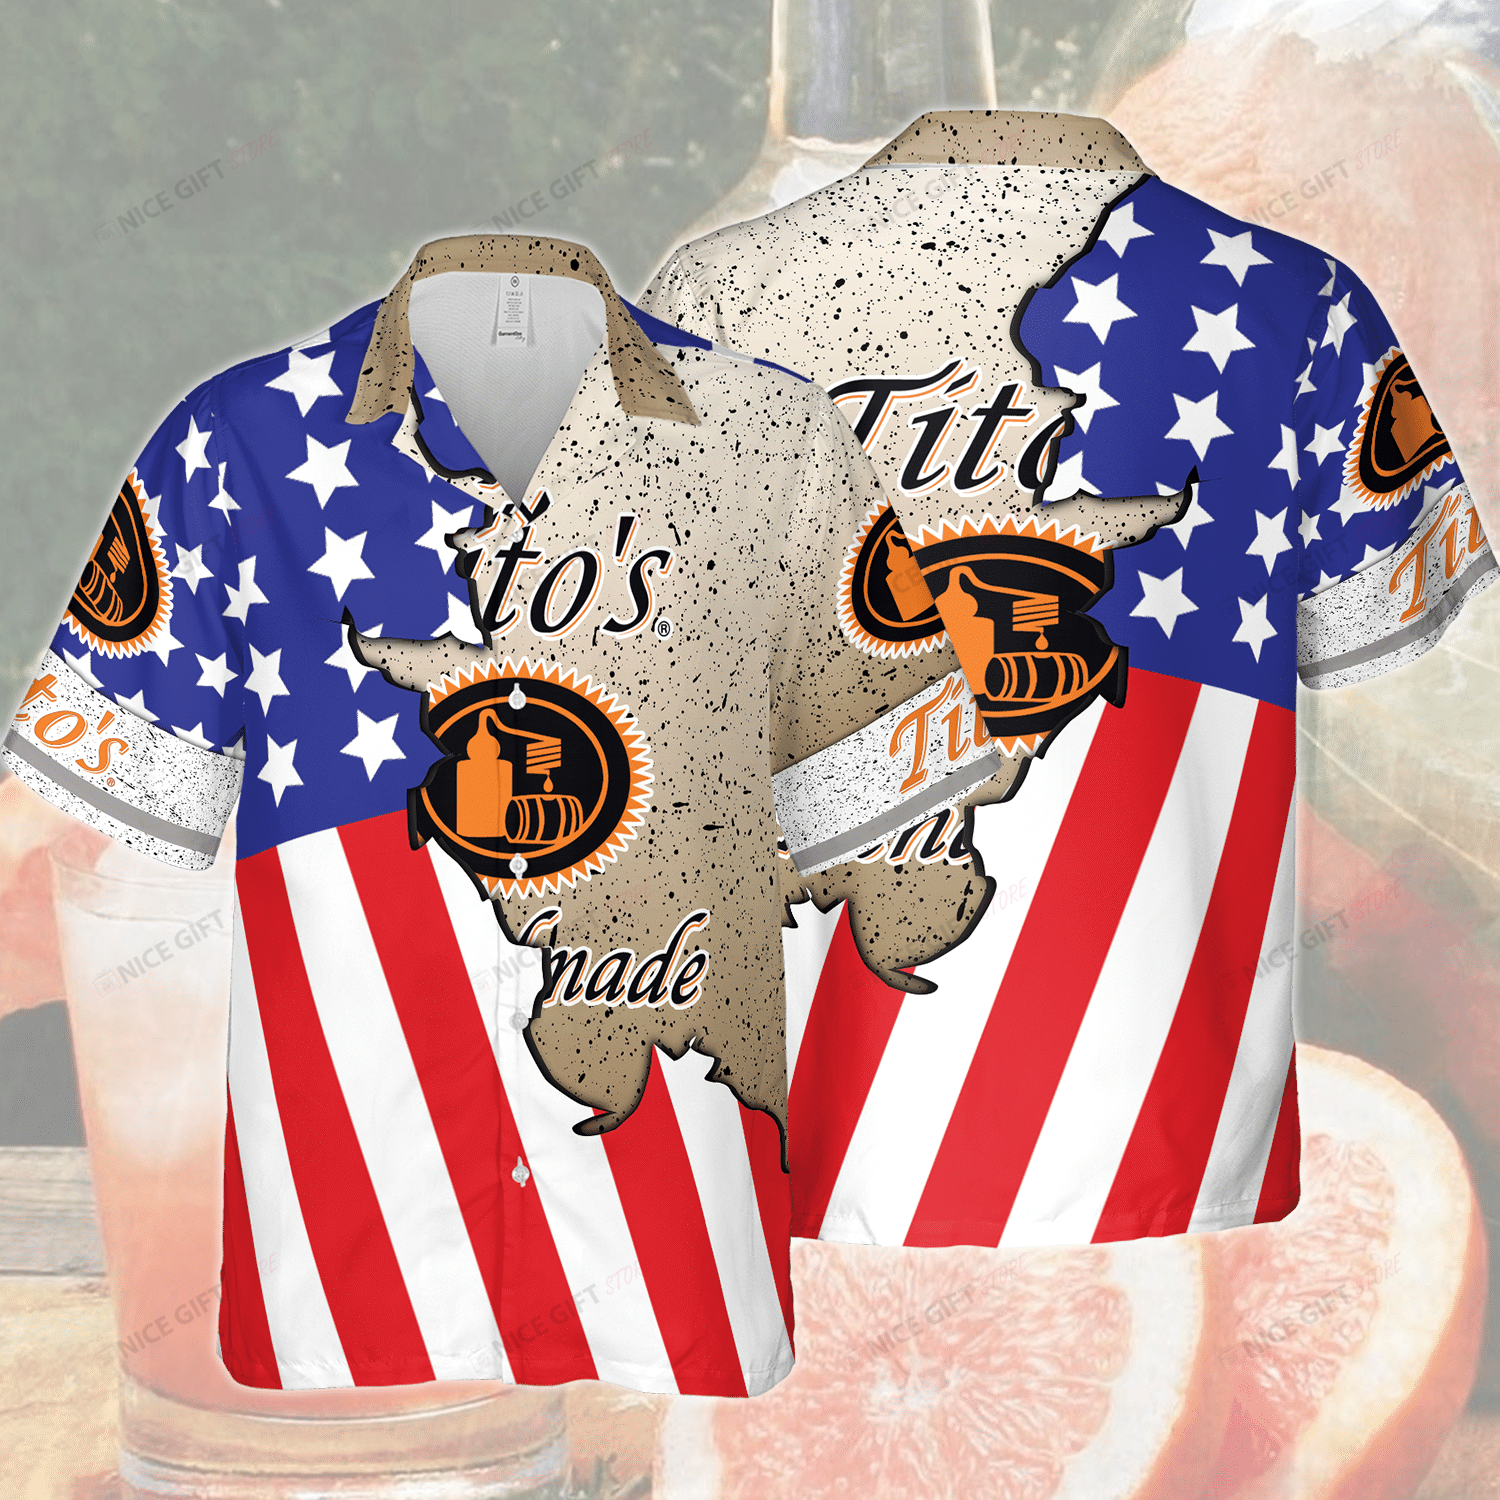 There are several types of Hawaiian shirts available on the market 91